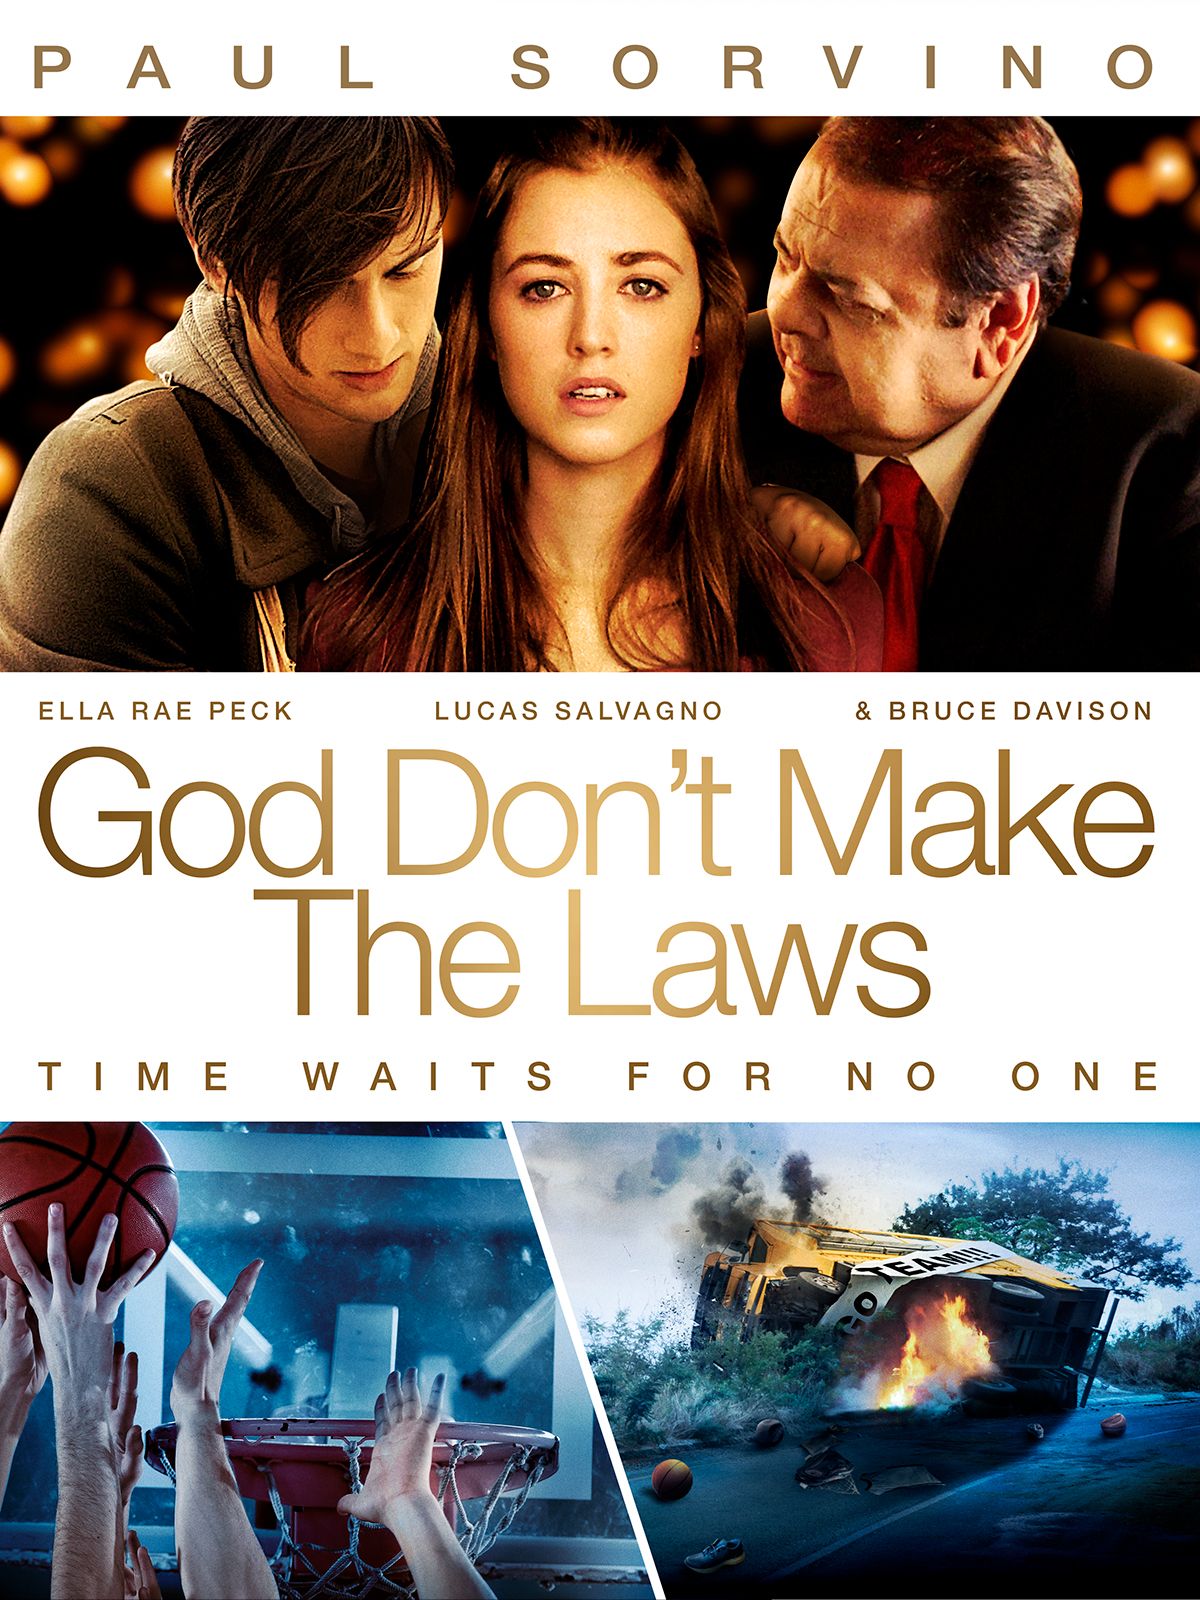 Keyart for the movie God Don’t Make the Laws